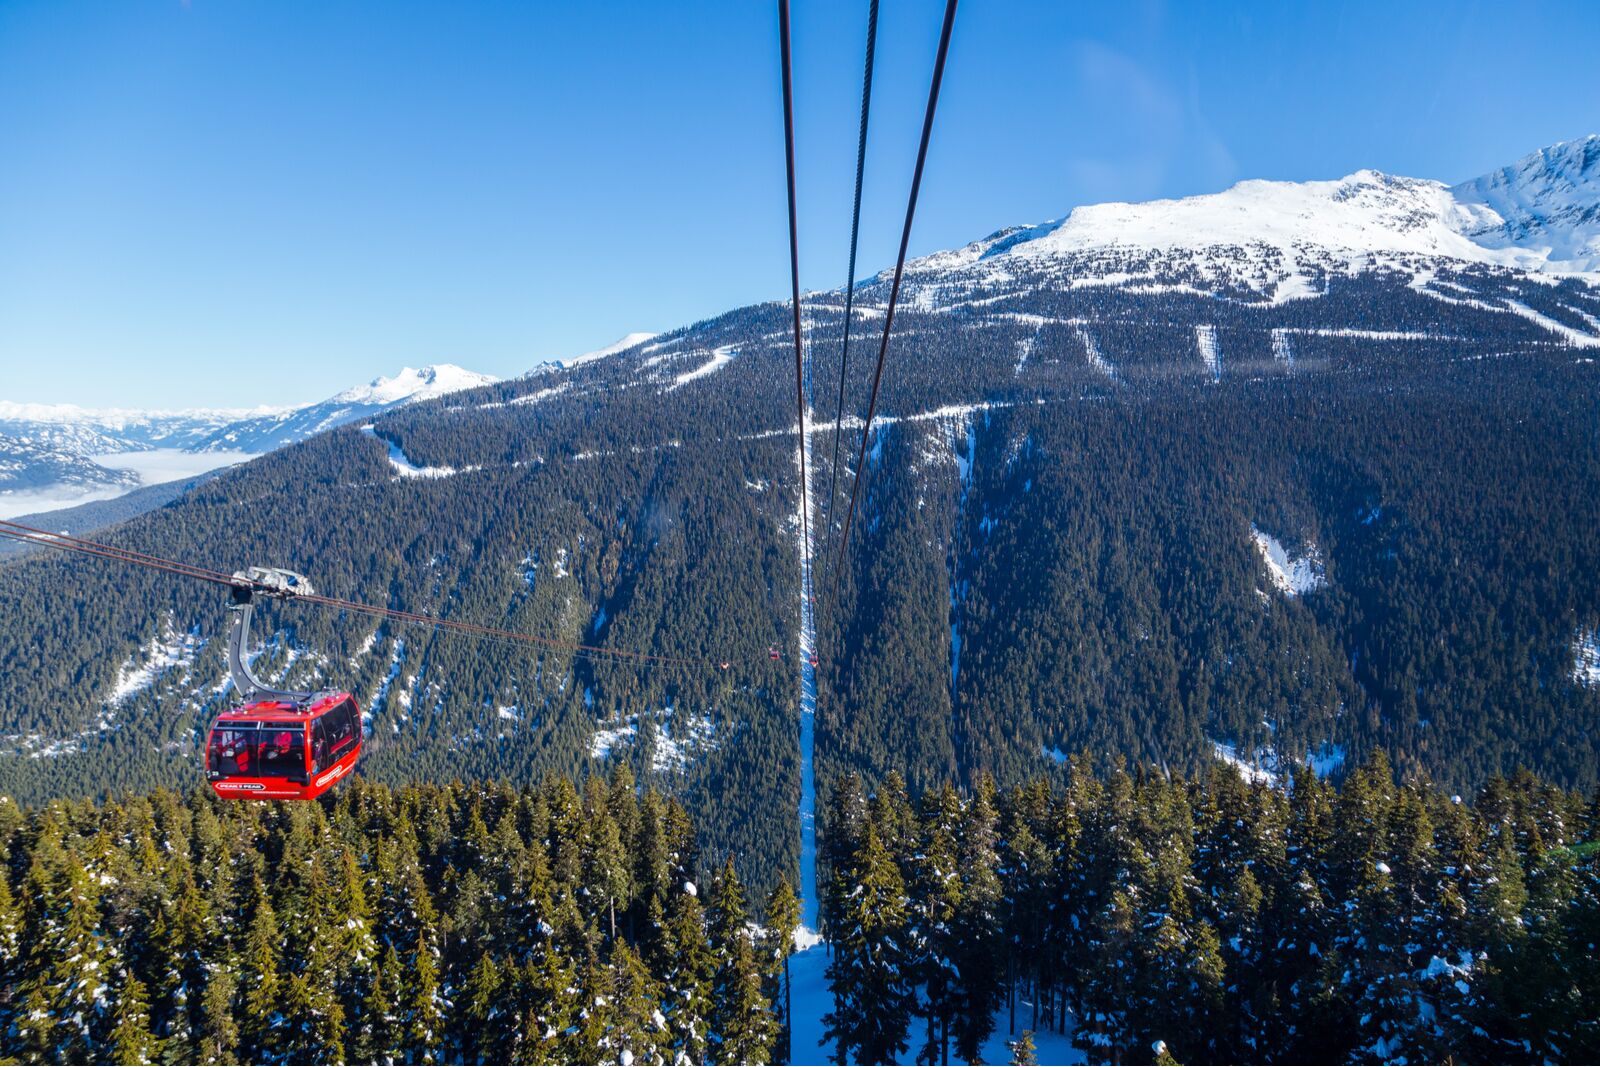 The Peak 2 Peak connects Blackcomb and Whistler and is the longest free span gondola in the world.